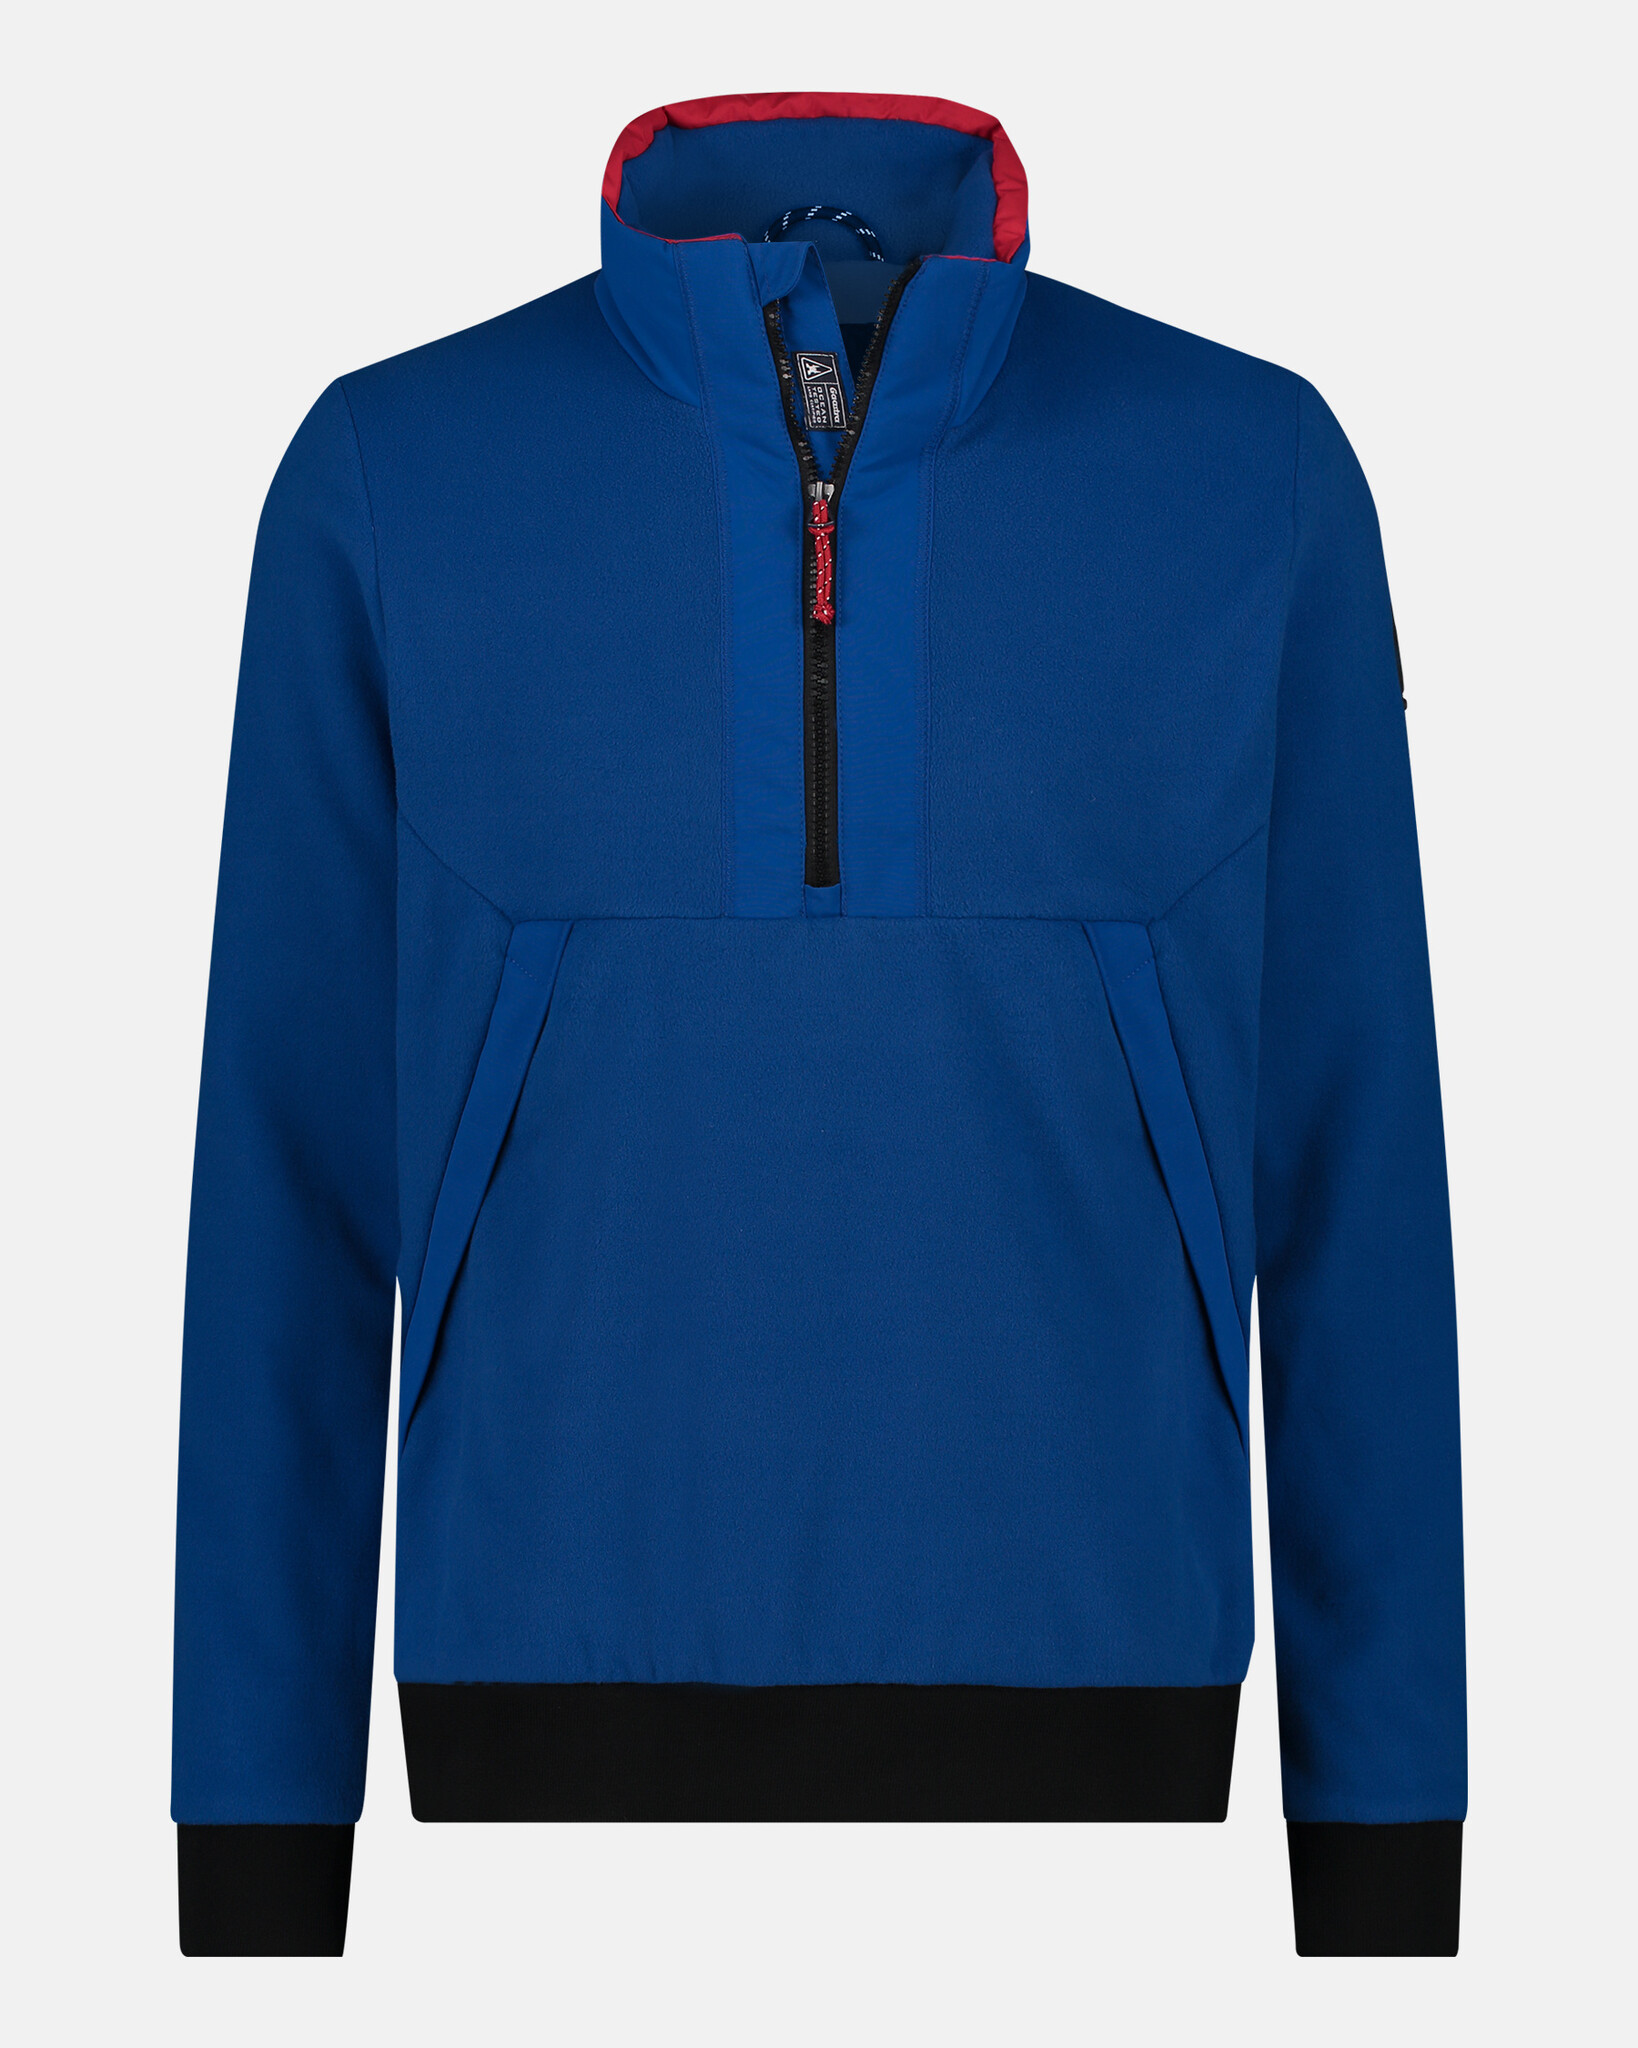 Fleece Anorak with windbreaker, made from 100% recycled polyester